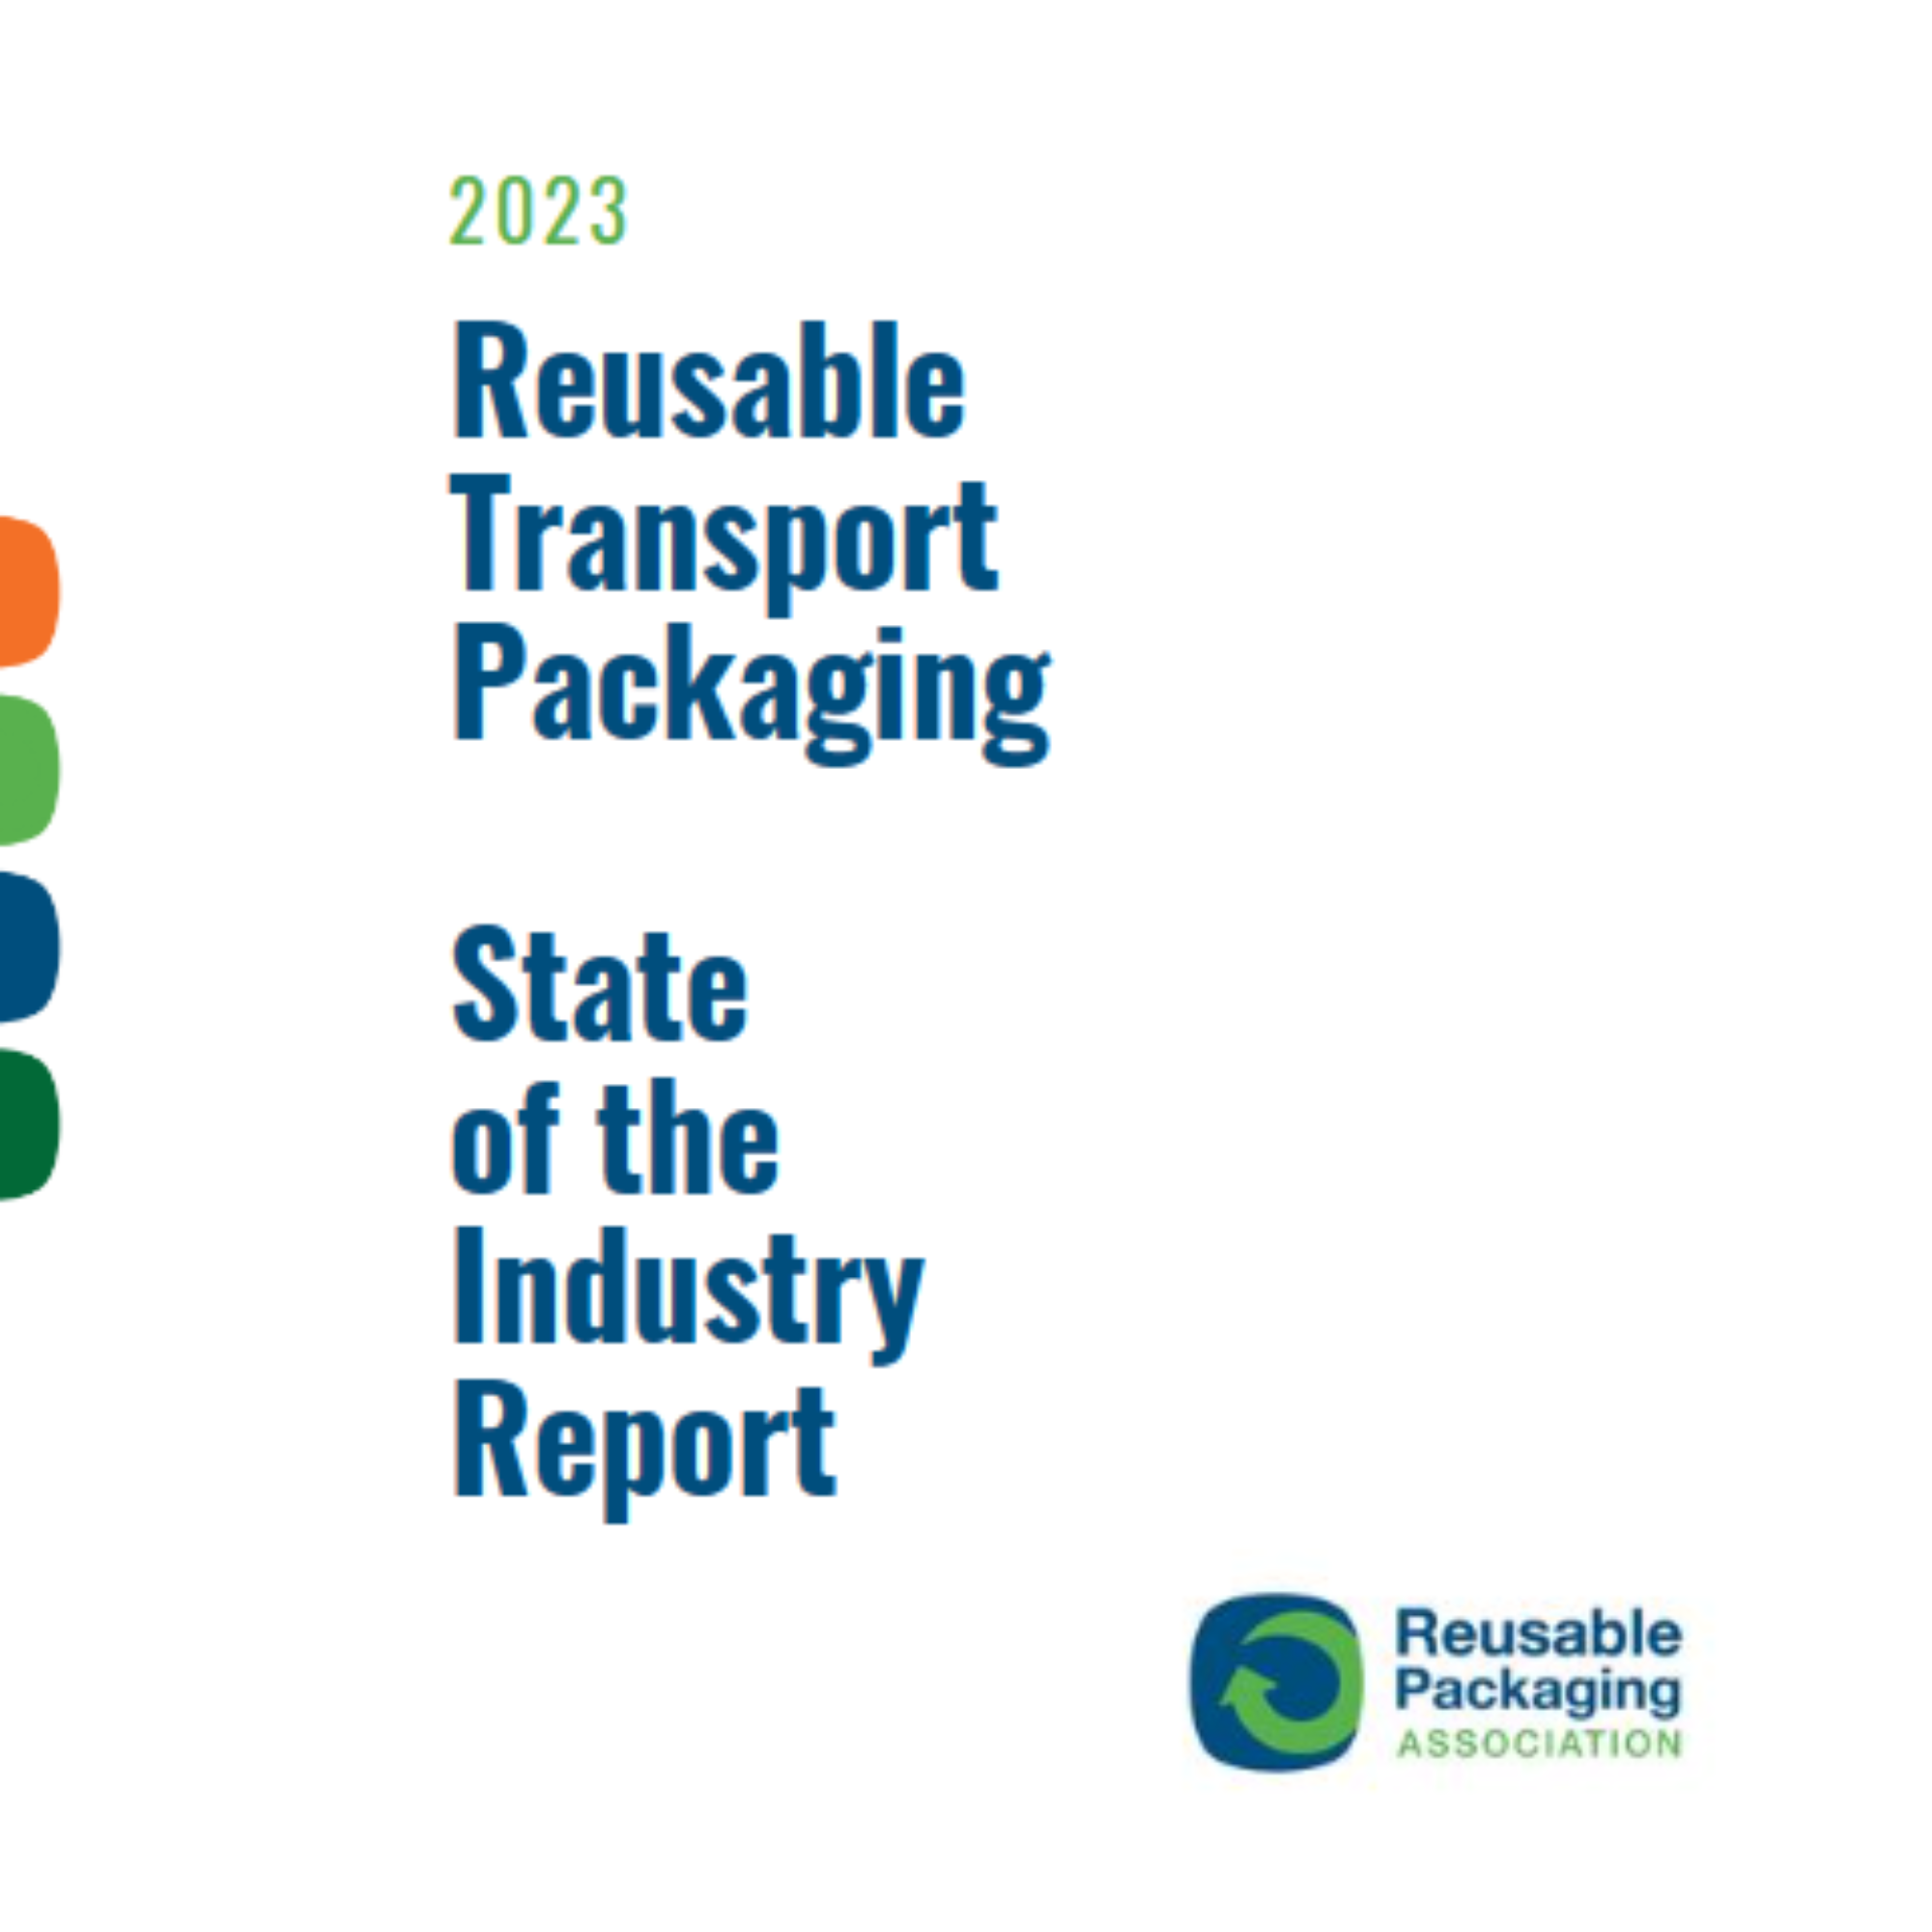 Reusable Packaging Association Publishes 2023 Reusable Transport Packaging State of the Industry Report